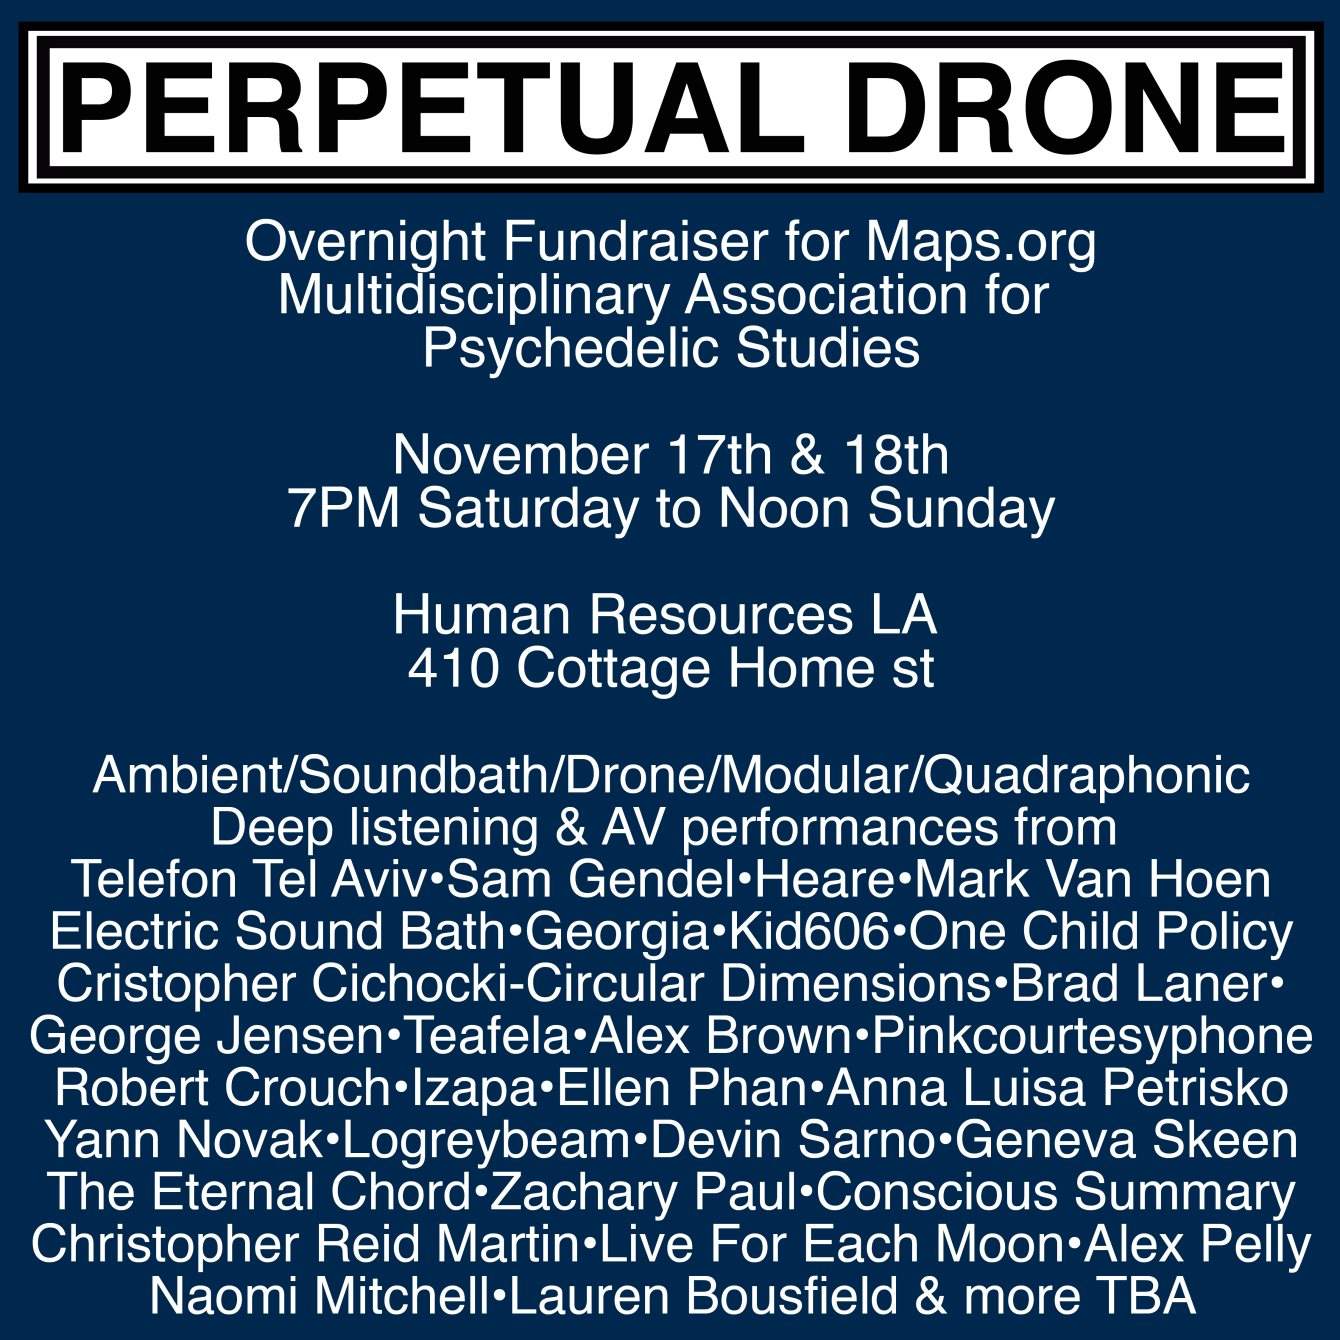 Perpetual Drone - Maps.org Overnight Benefit - フライヤー裏